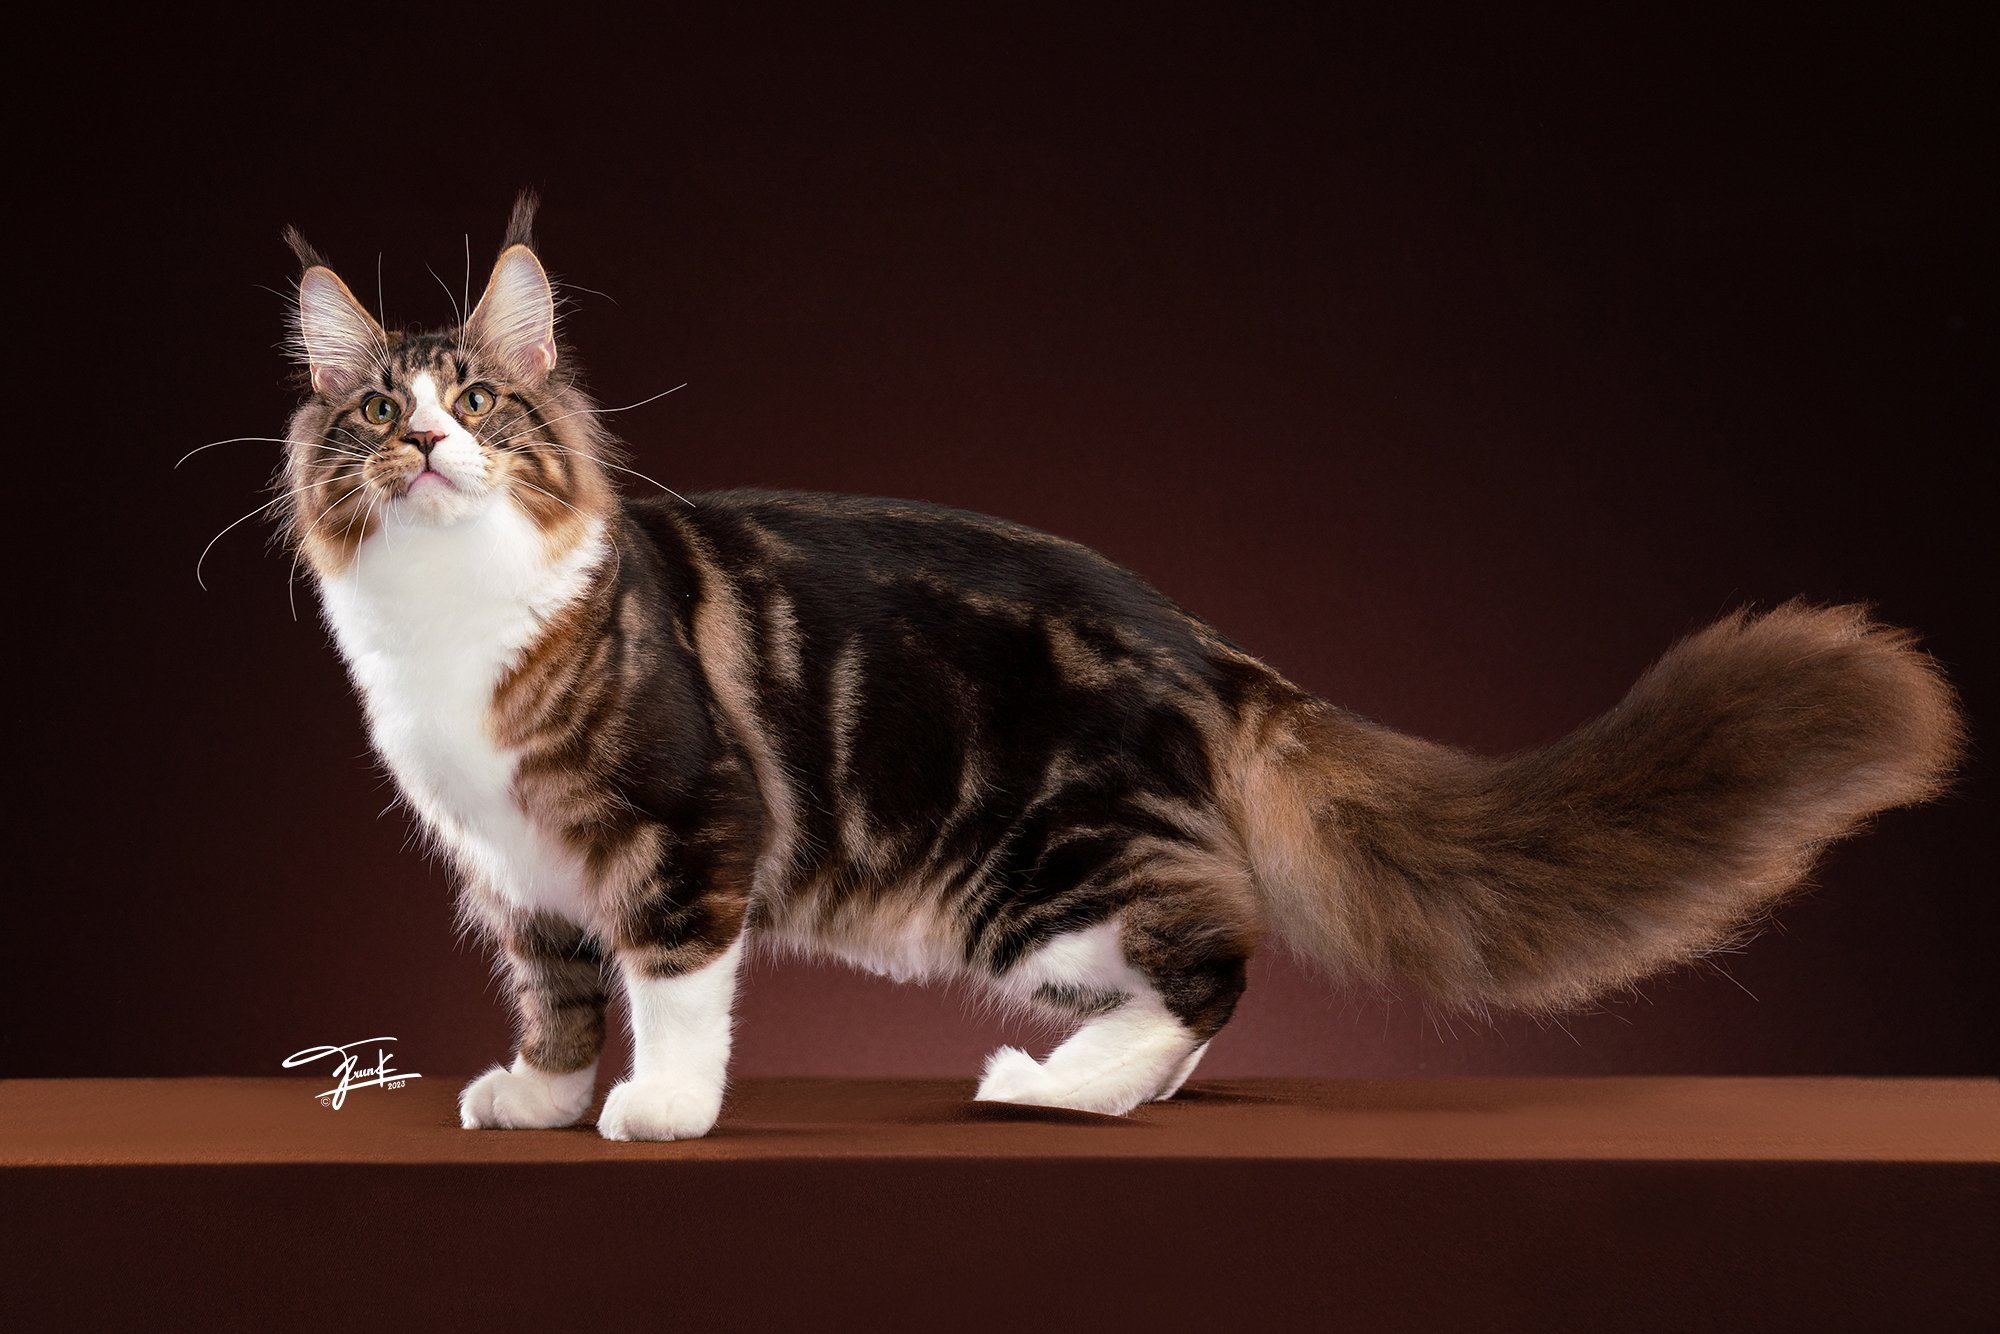 Maine coon, เมนคูน,แมวเมนคูน, เมนคูนแท้ ,ลักษณะMainecoon ,mainecoonthailand 